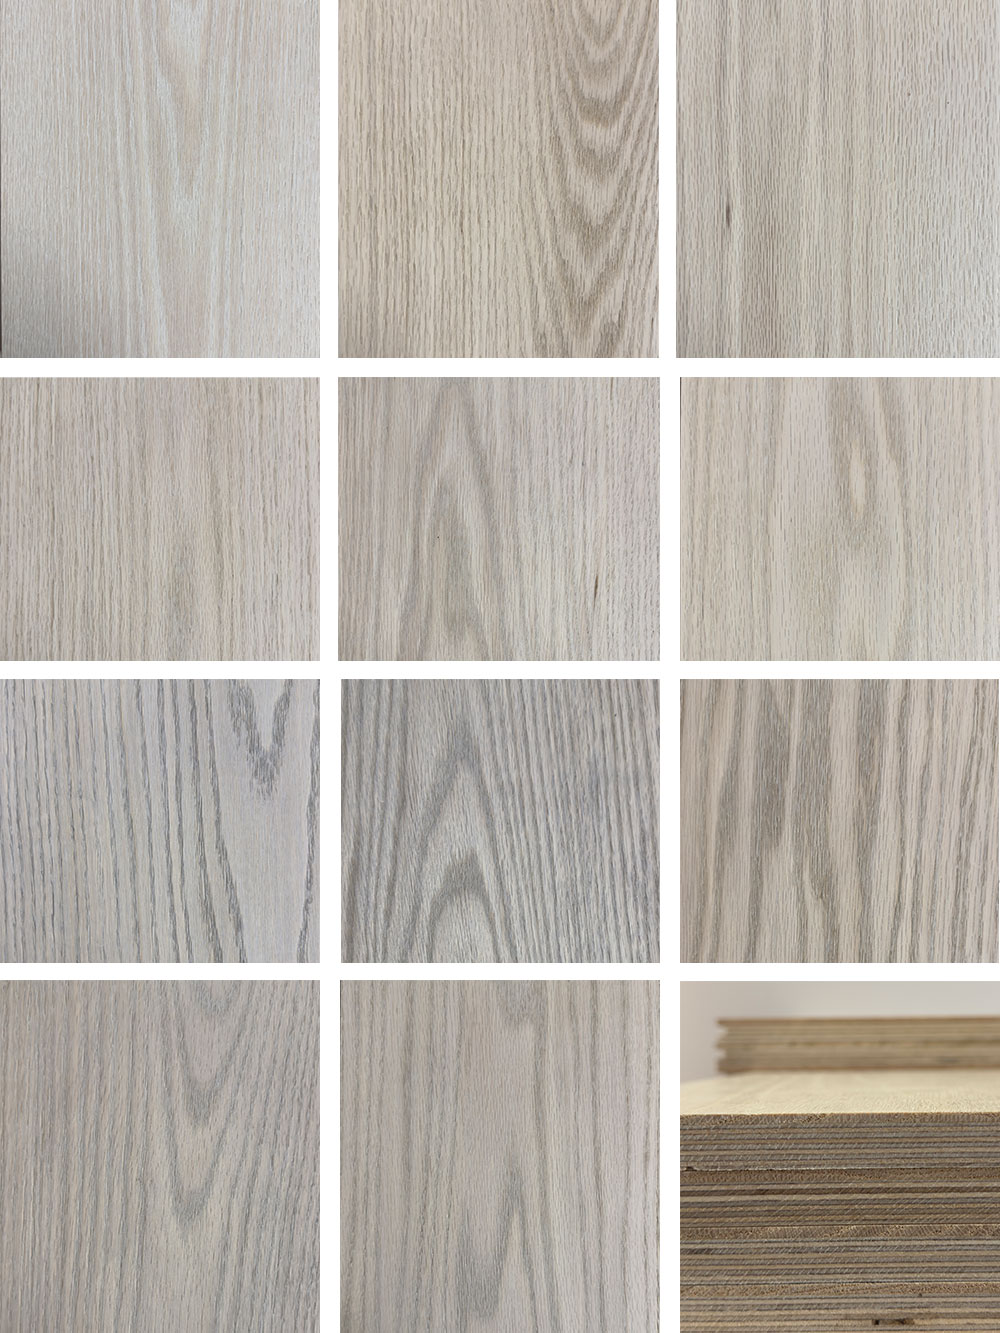 You can see images of the range of colours opposite and for additional durability we use birch plywood for the backing.